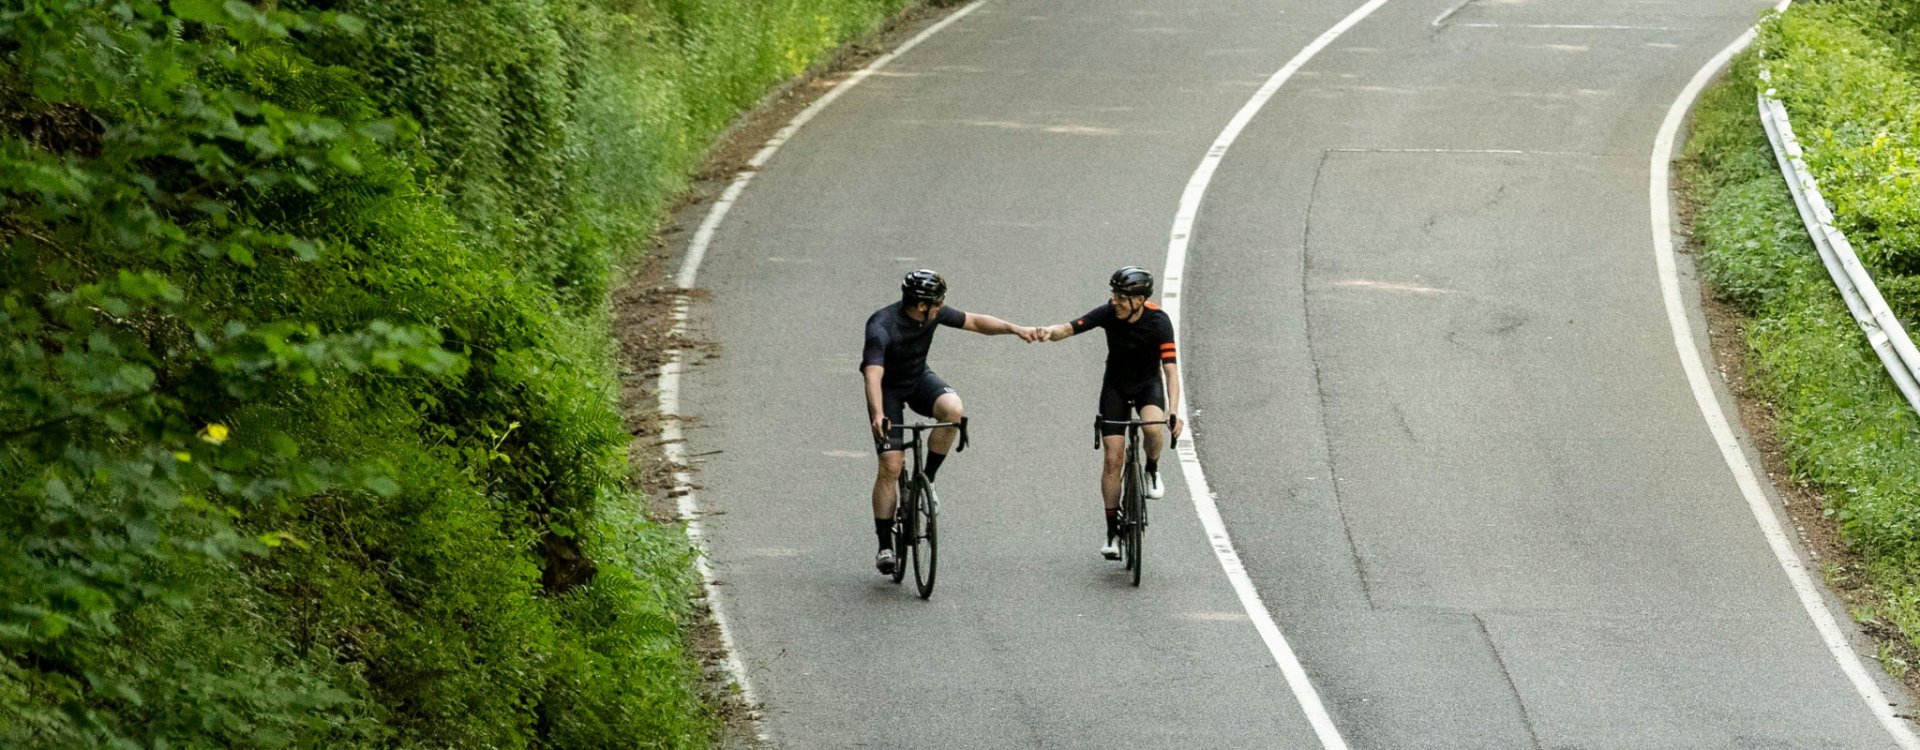 Two road cyclists on Specialized Tarmac SL7 bikes shake an appreciative fist at each other after completing the climb.